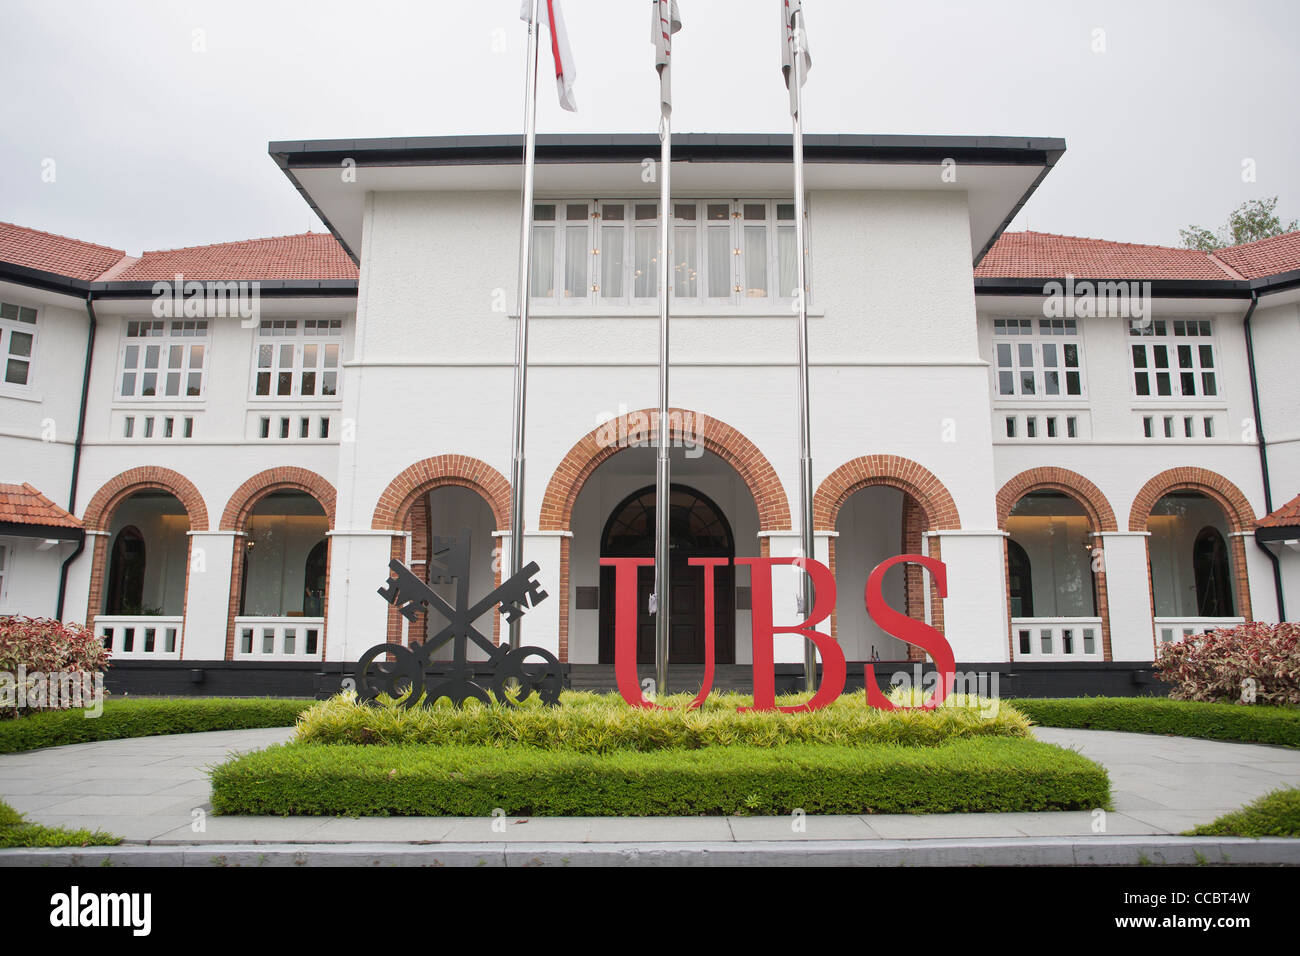 The facade of the UBS Business University in Singapore. Stock Photo